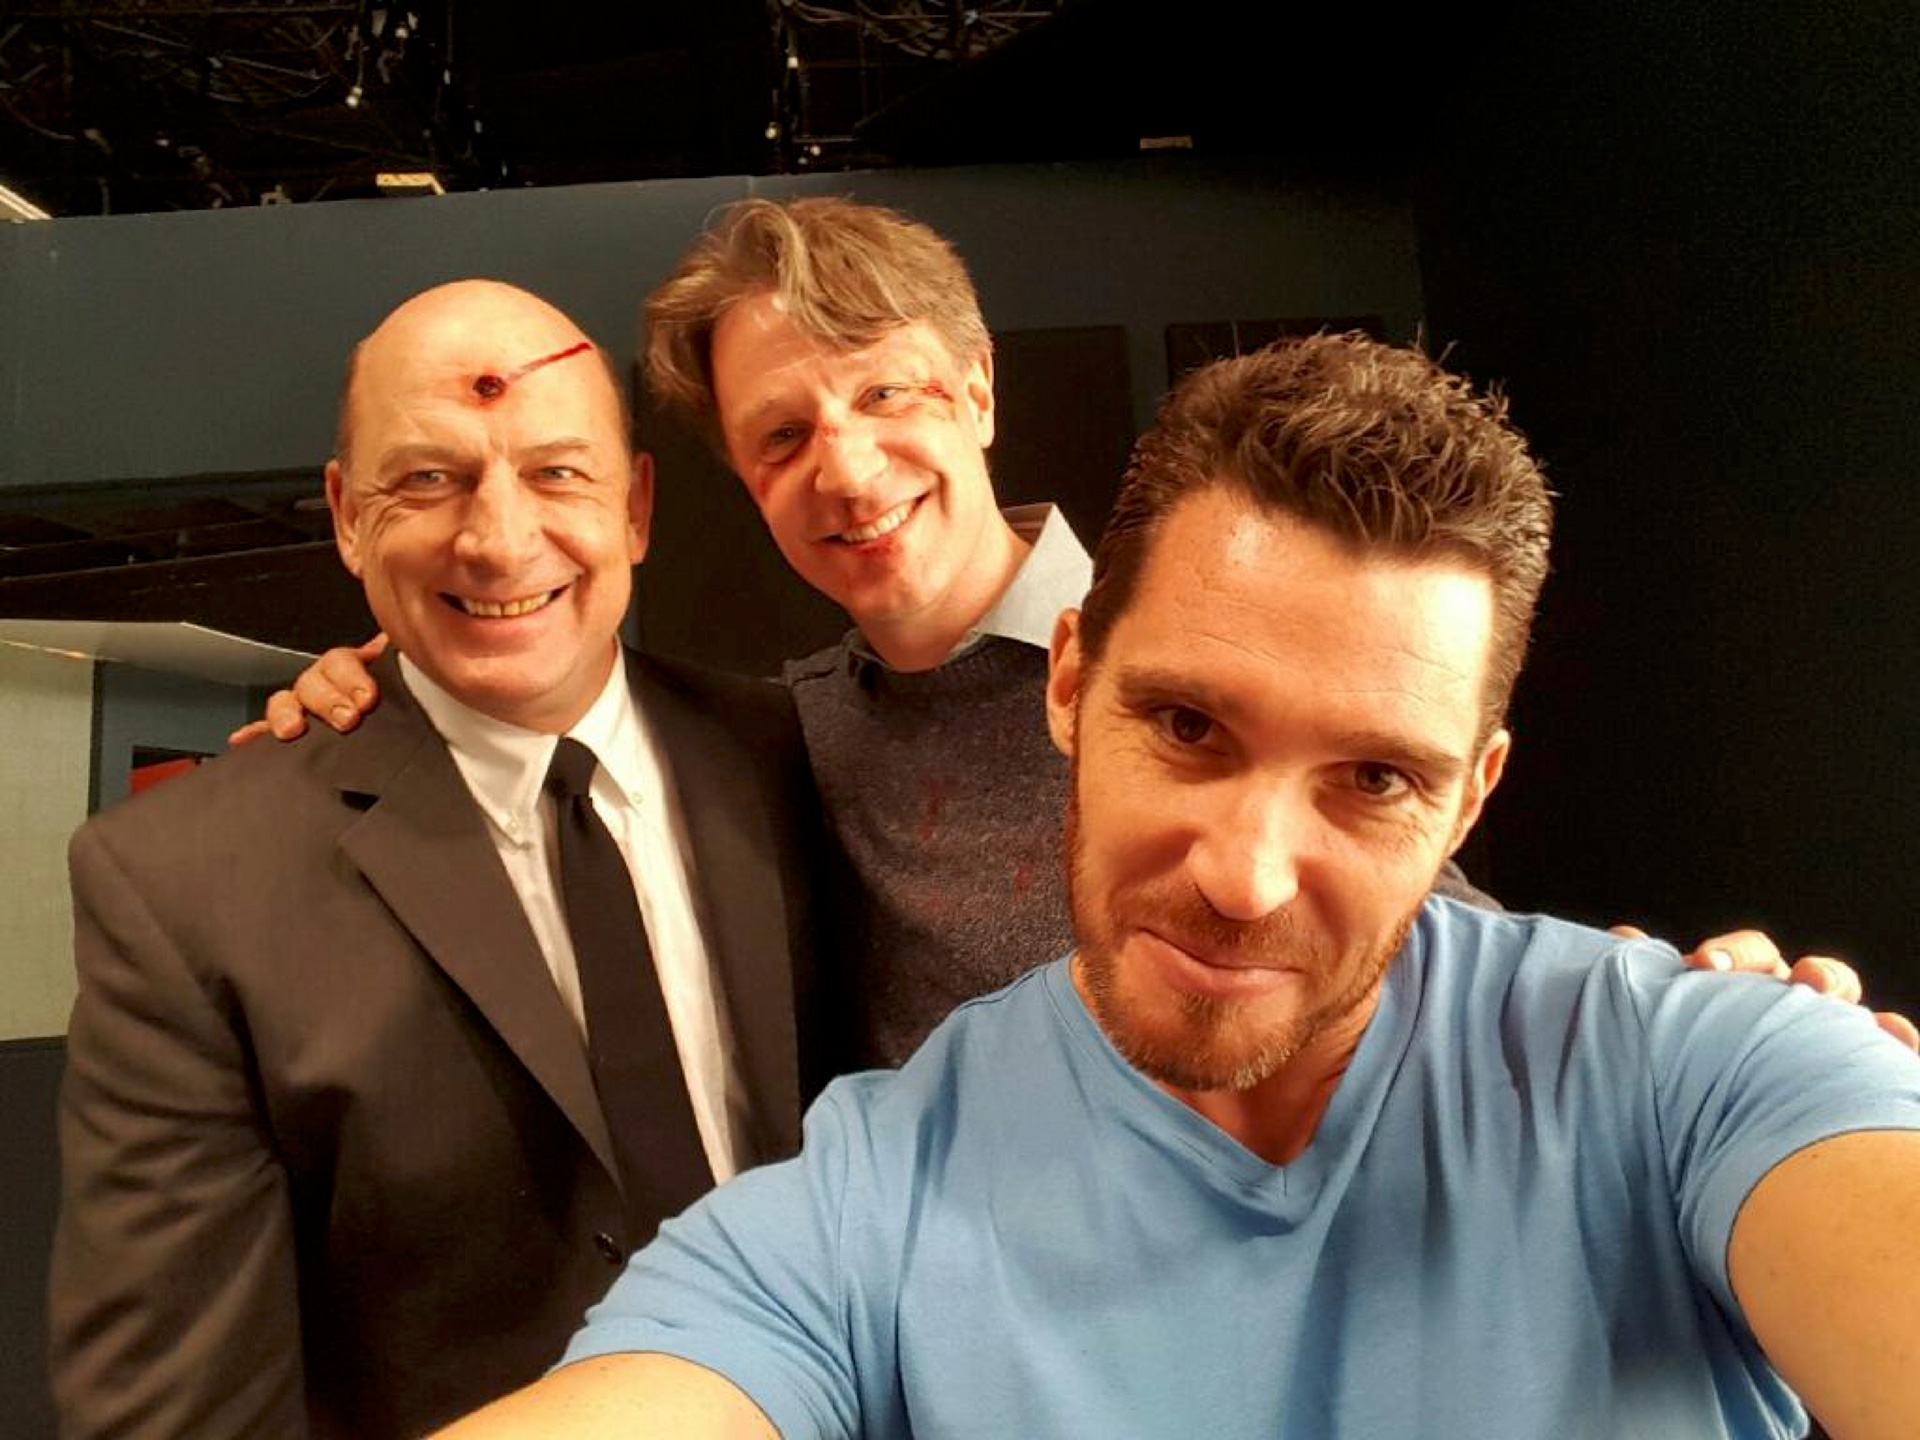 On the set of INTERROGATION with Gys de Villiers and Dave Anthony Buglione.